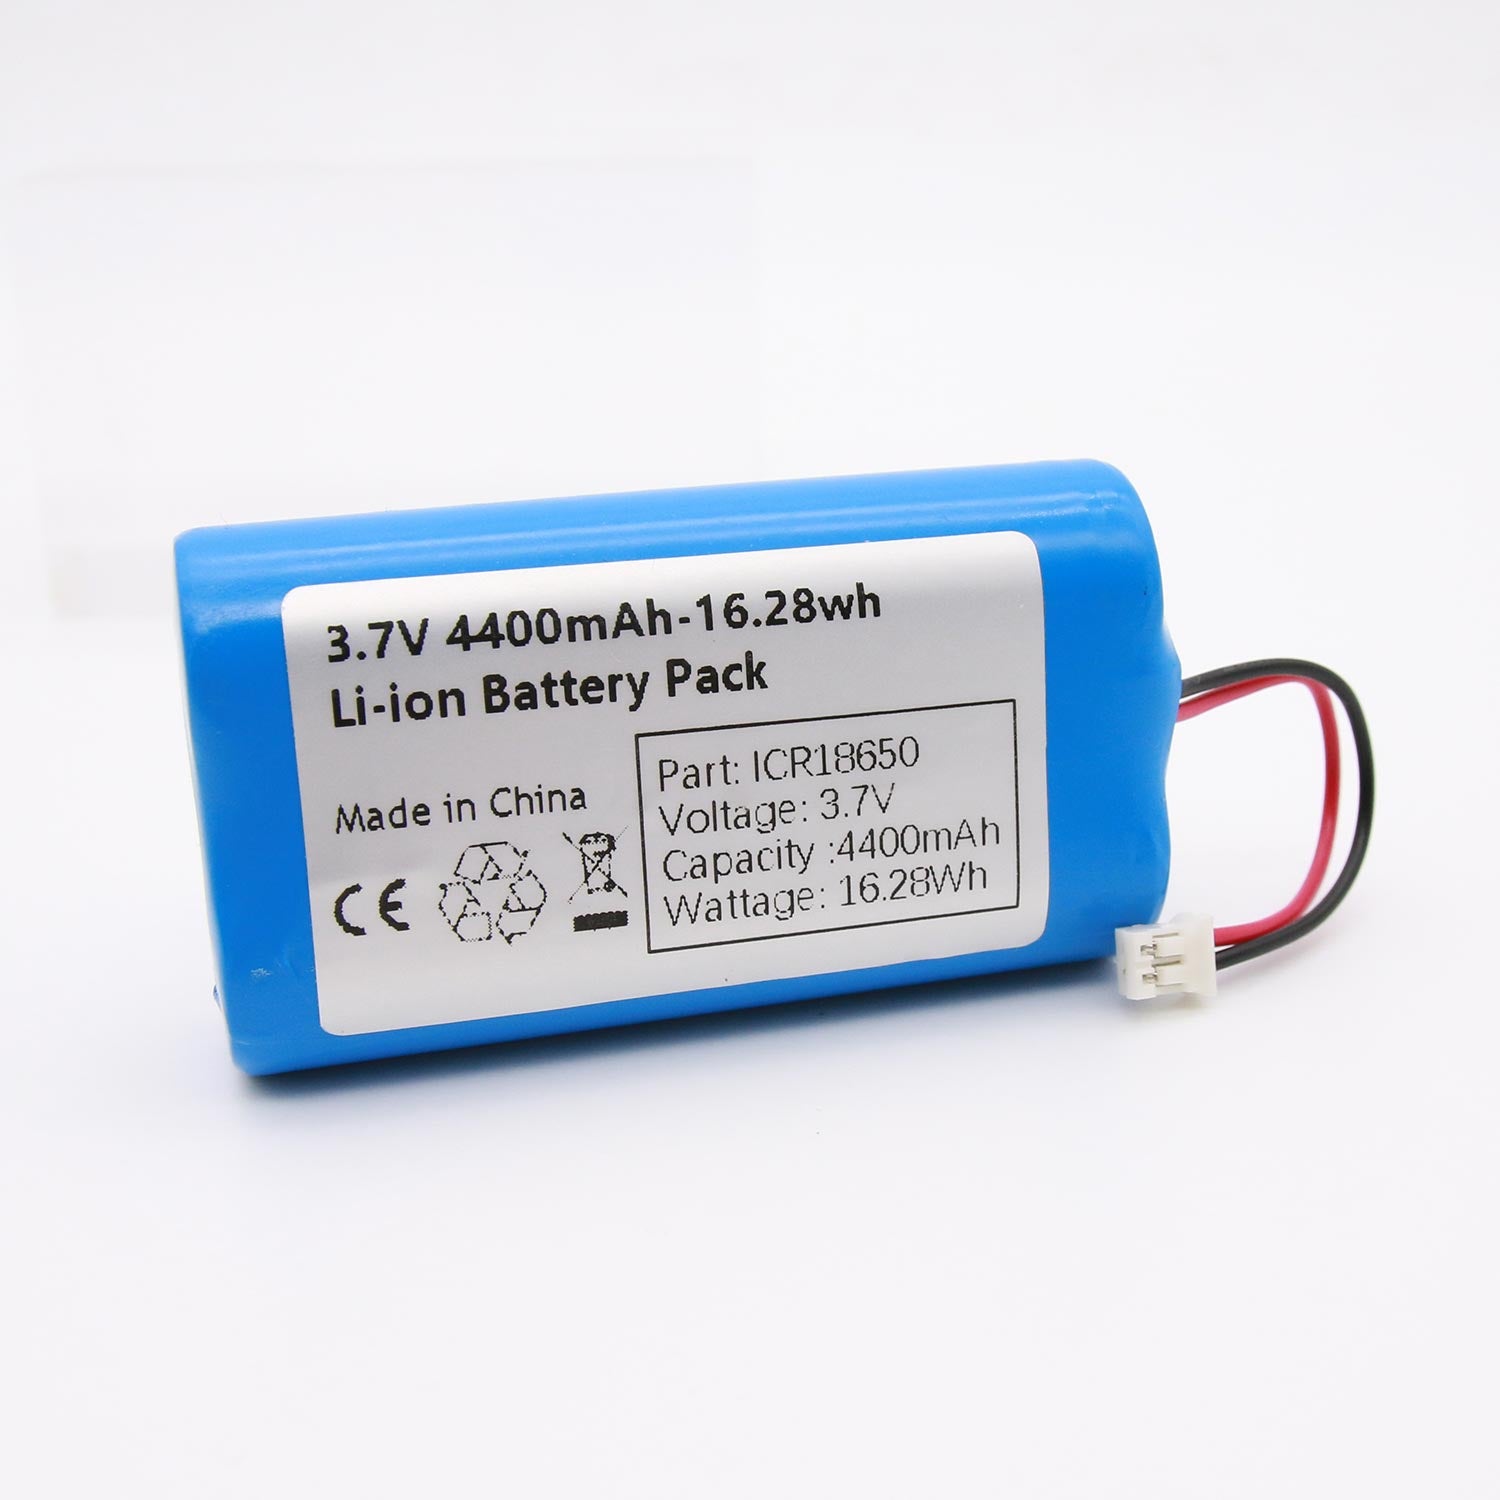 YDL 3.7V 5200mAh Li-ion Rechargeable Batteries Replacement Batteries for Electronics, Toys, Lighting, Equipment